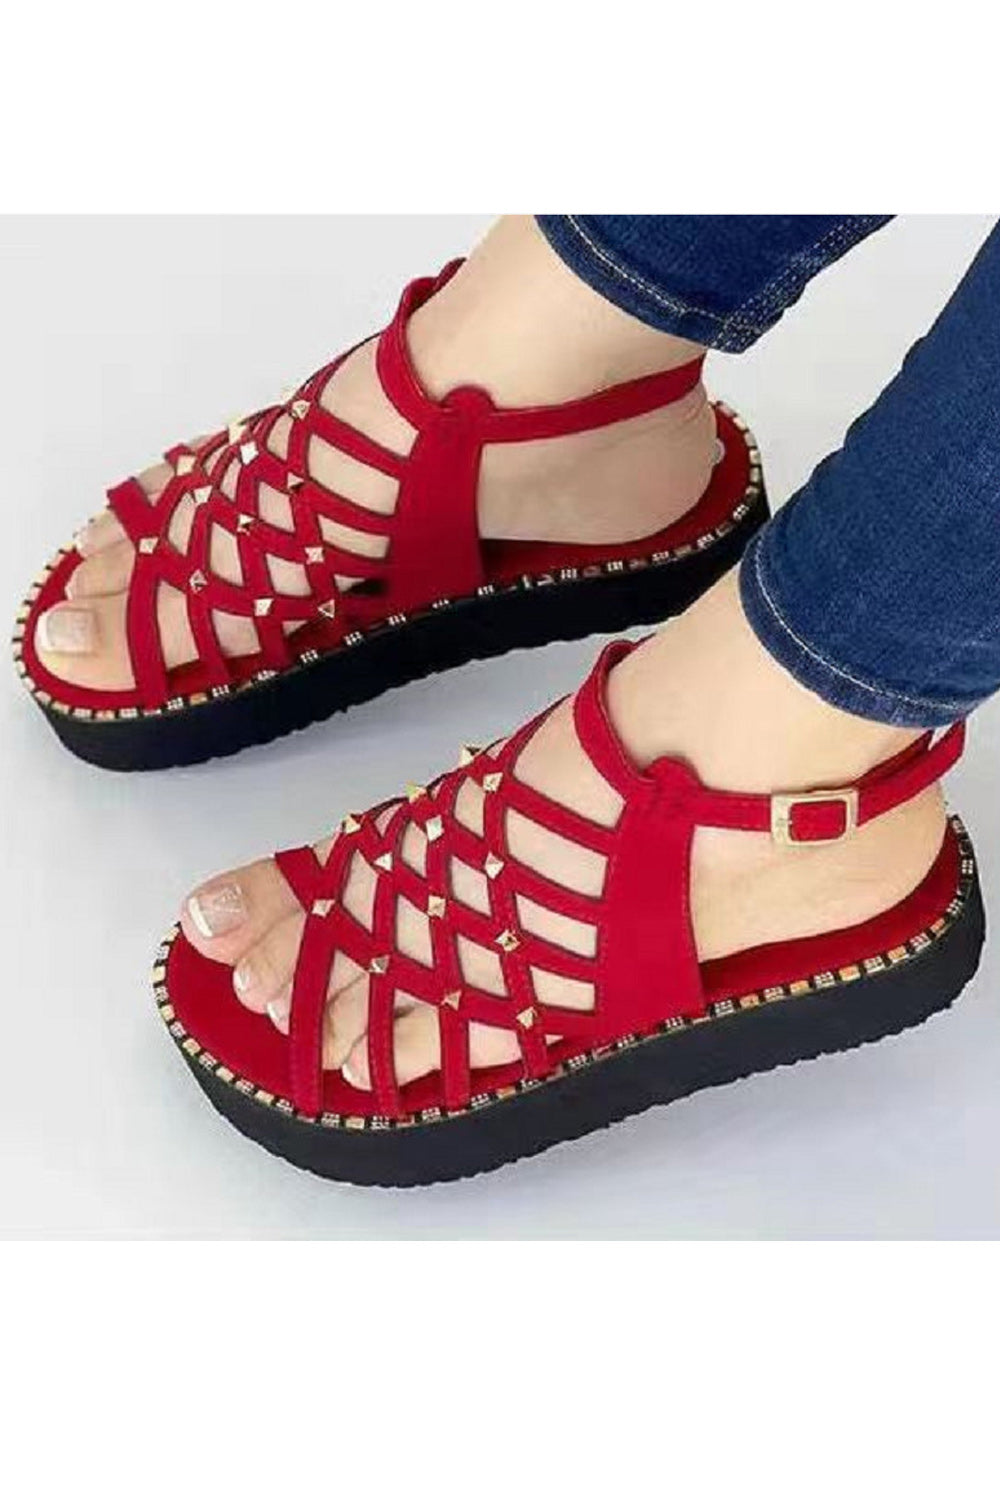 Women Hollow Styled Thin Strape Thick Rubber Soled Superb Solid Colored Summer Casual Sandal - WSD110440